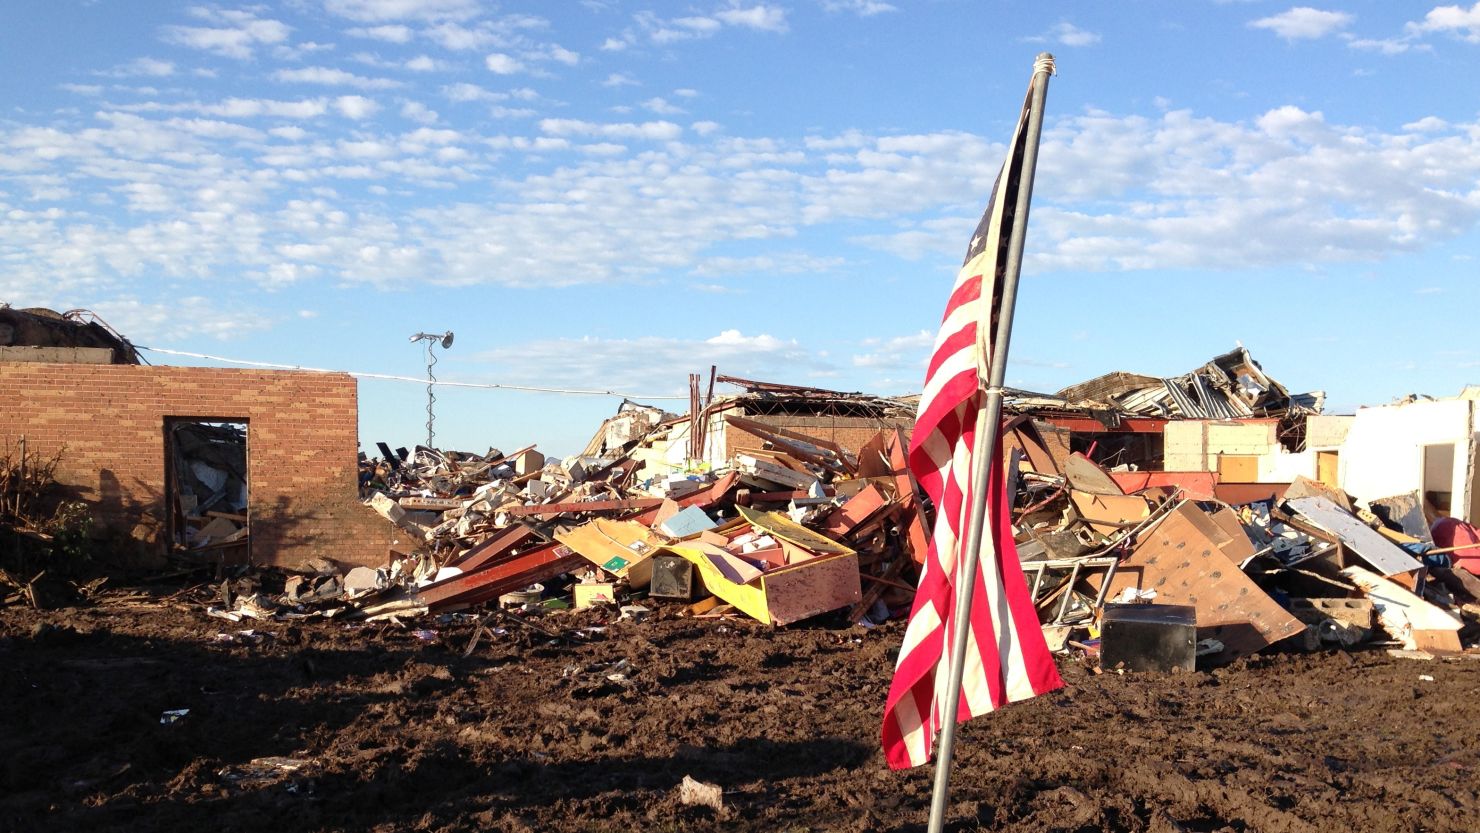 Plaza Towers Elementary in Moore, Oklahoma, was destroyed by a tornado in spring 2013.